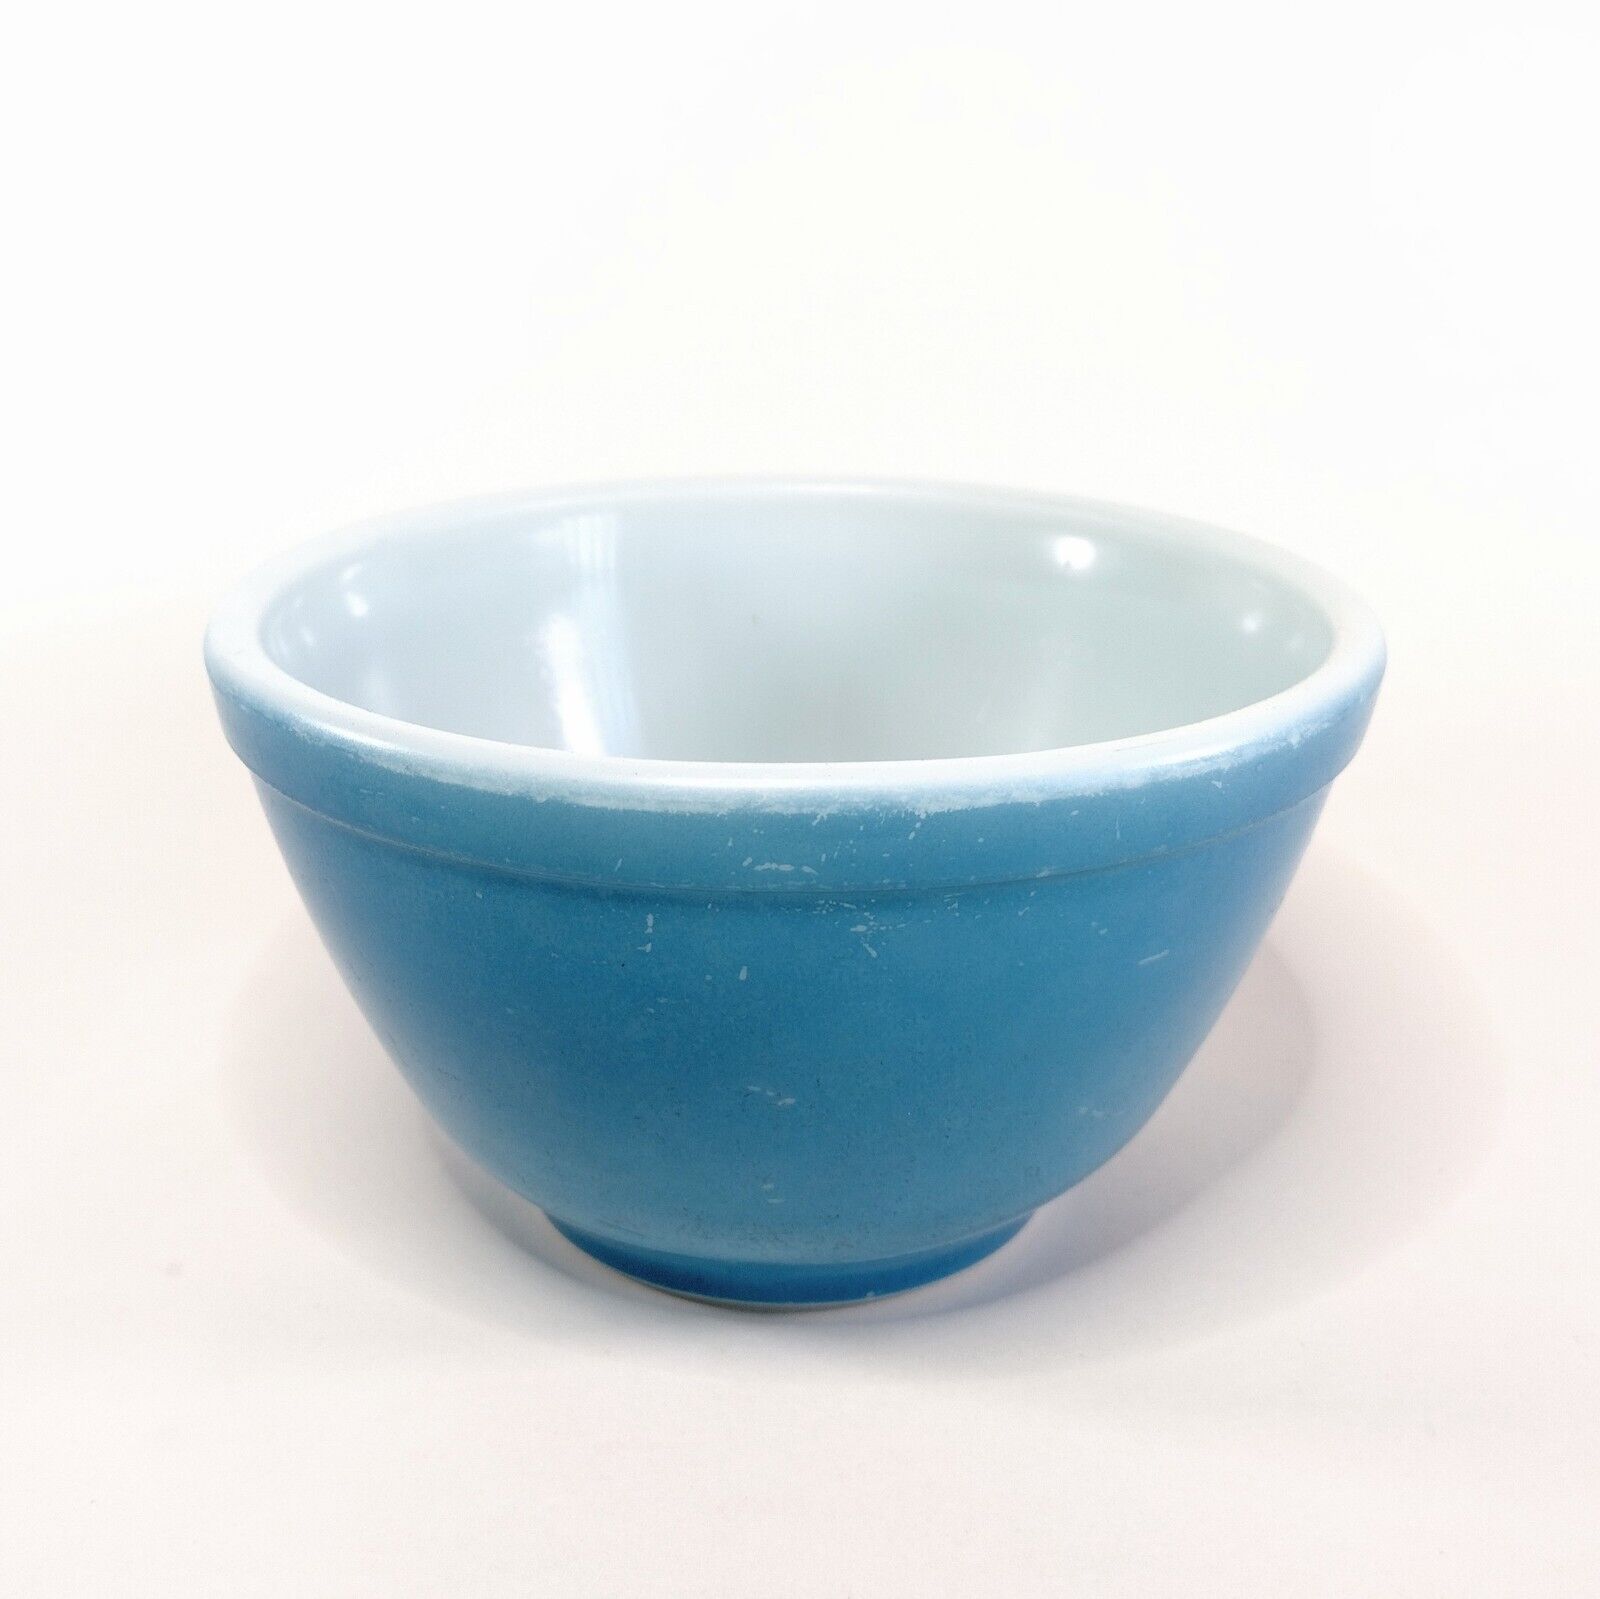 Early Vtg Pyrex Mixing Bowl Primary Blue Small Nesting TM REG - US PAT OFF